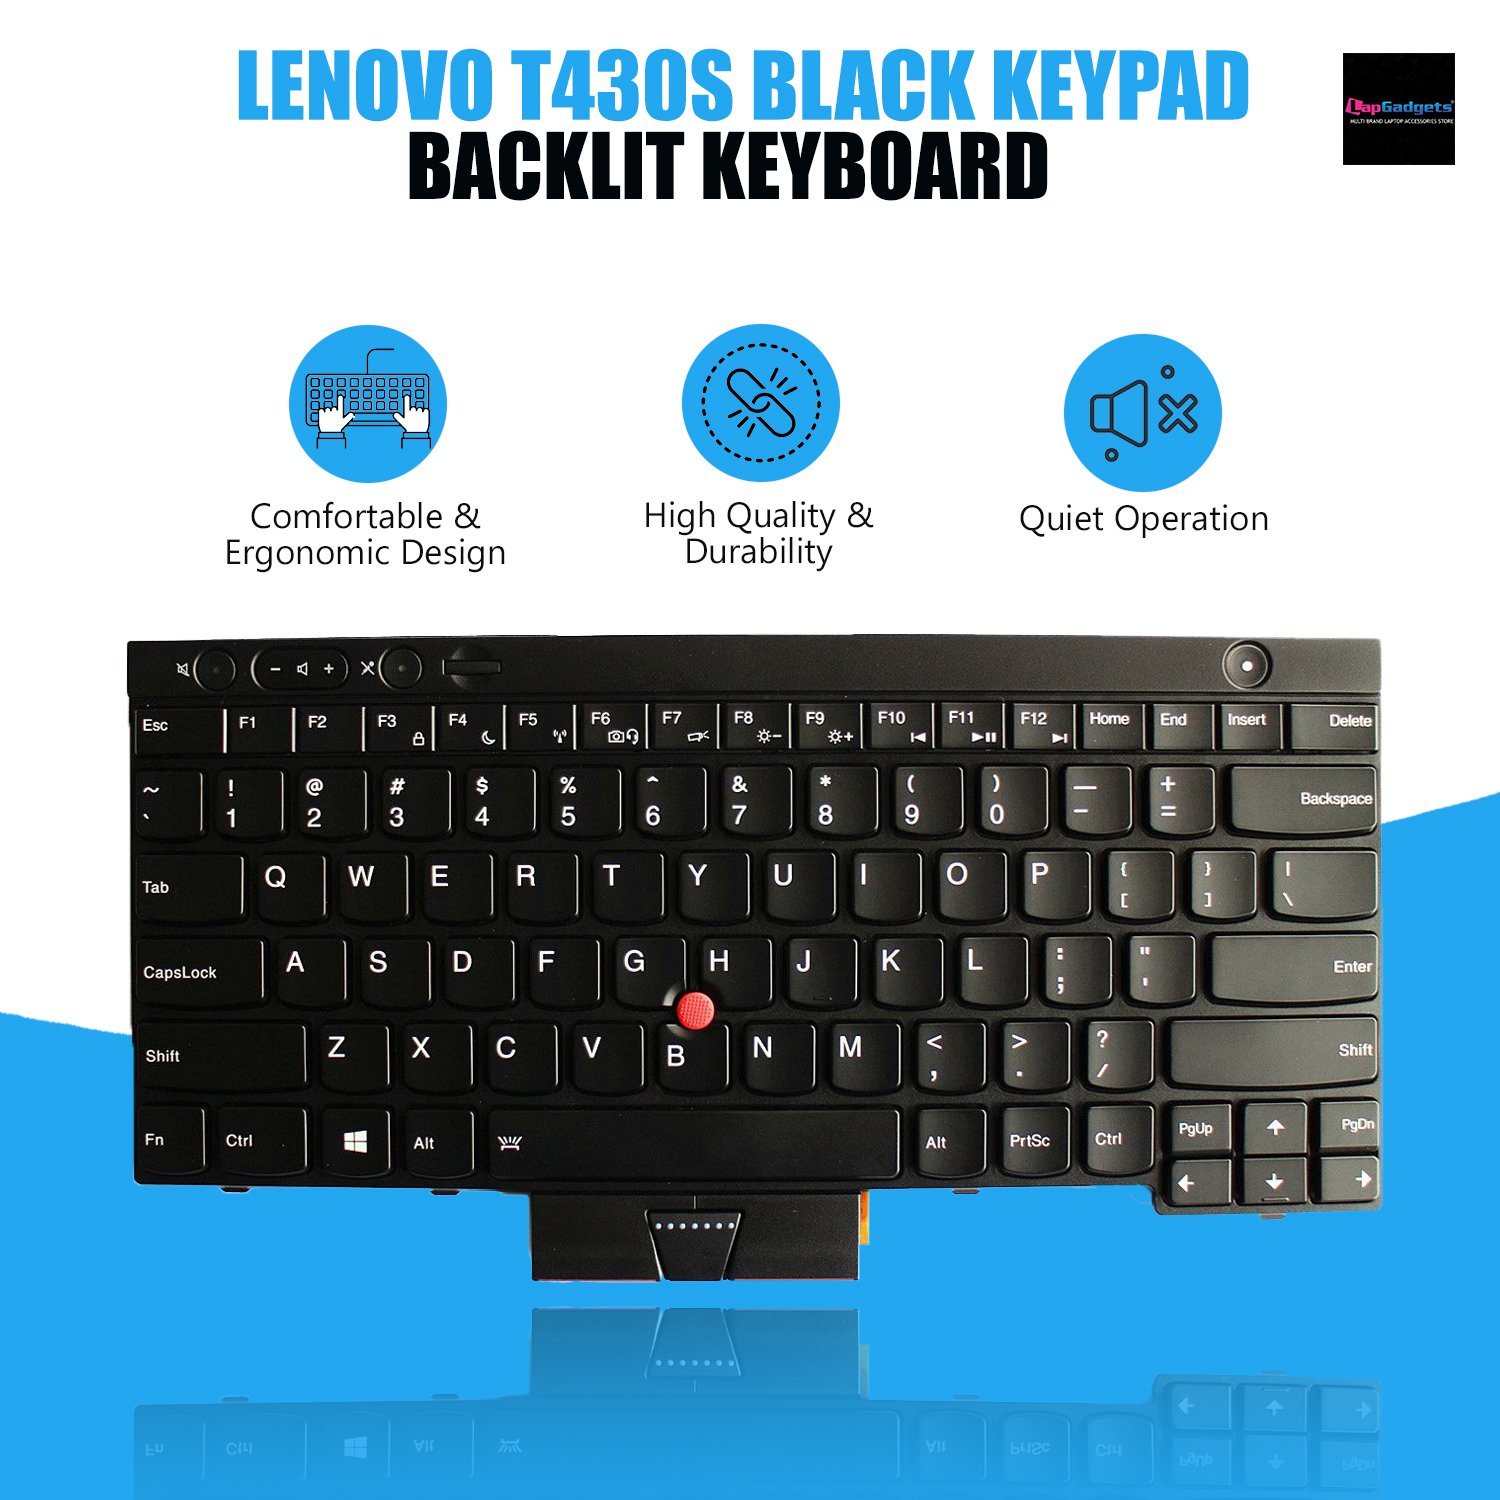 New Backlit Keyboard for ThinkPad T430S/T430/T430I (Not Compatible with T430U) & X230/X230T/X230I (Not Compatible with X230S) - T530/W530 - Available at LapgadgetsNew Backlit Keyboard for ThinkPad T430S/T430/T430I (Not Compatible with T430U) & X230/X230T/X230I (Not Compatible with X230S) - T530/W530 - Available at Lapgadgets